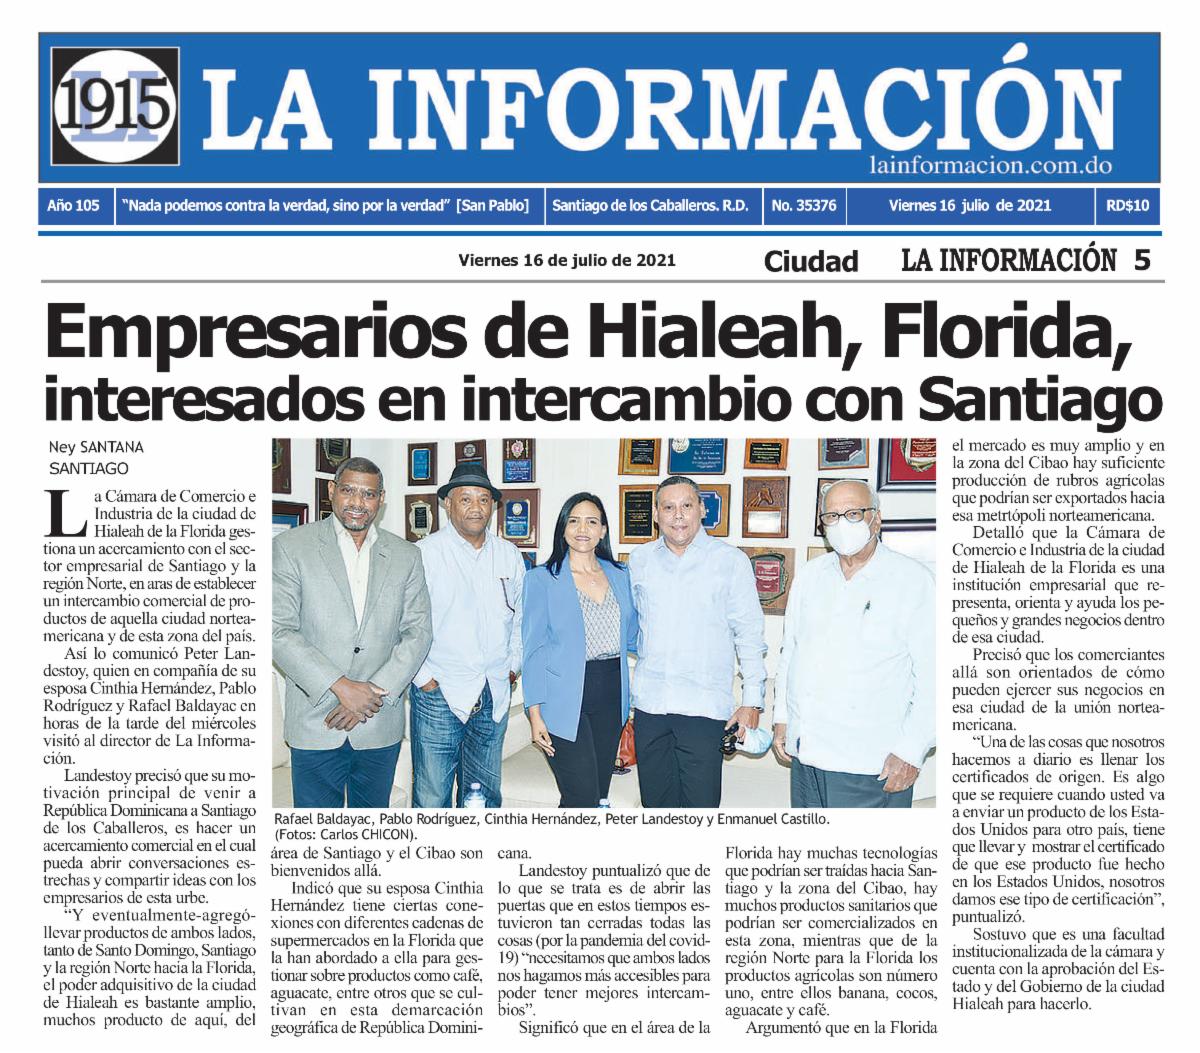 The Hialeah Chamber of Commerce and industries manages an approach with the Santiago